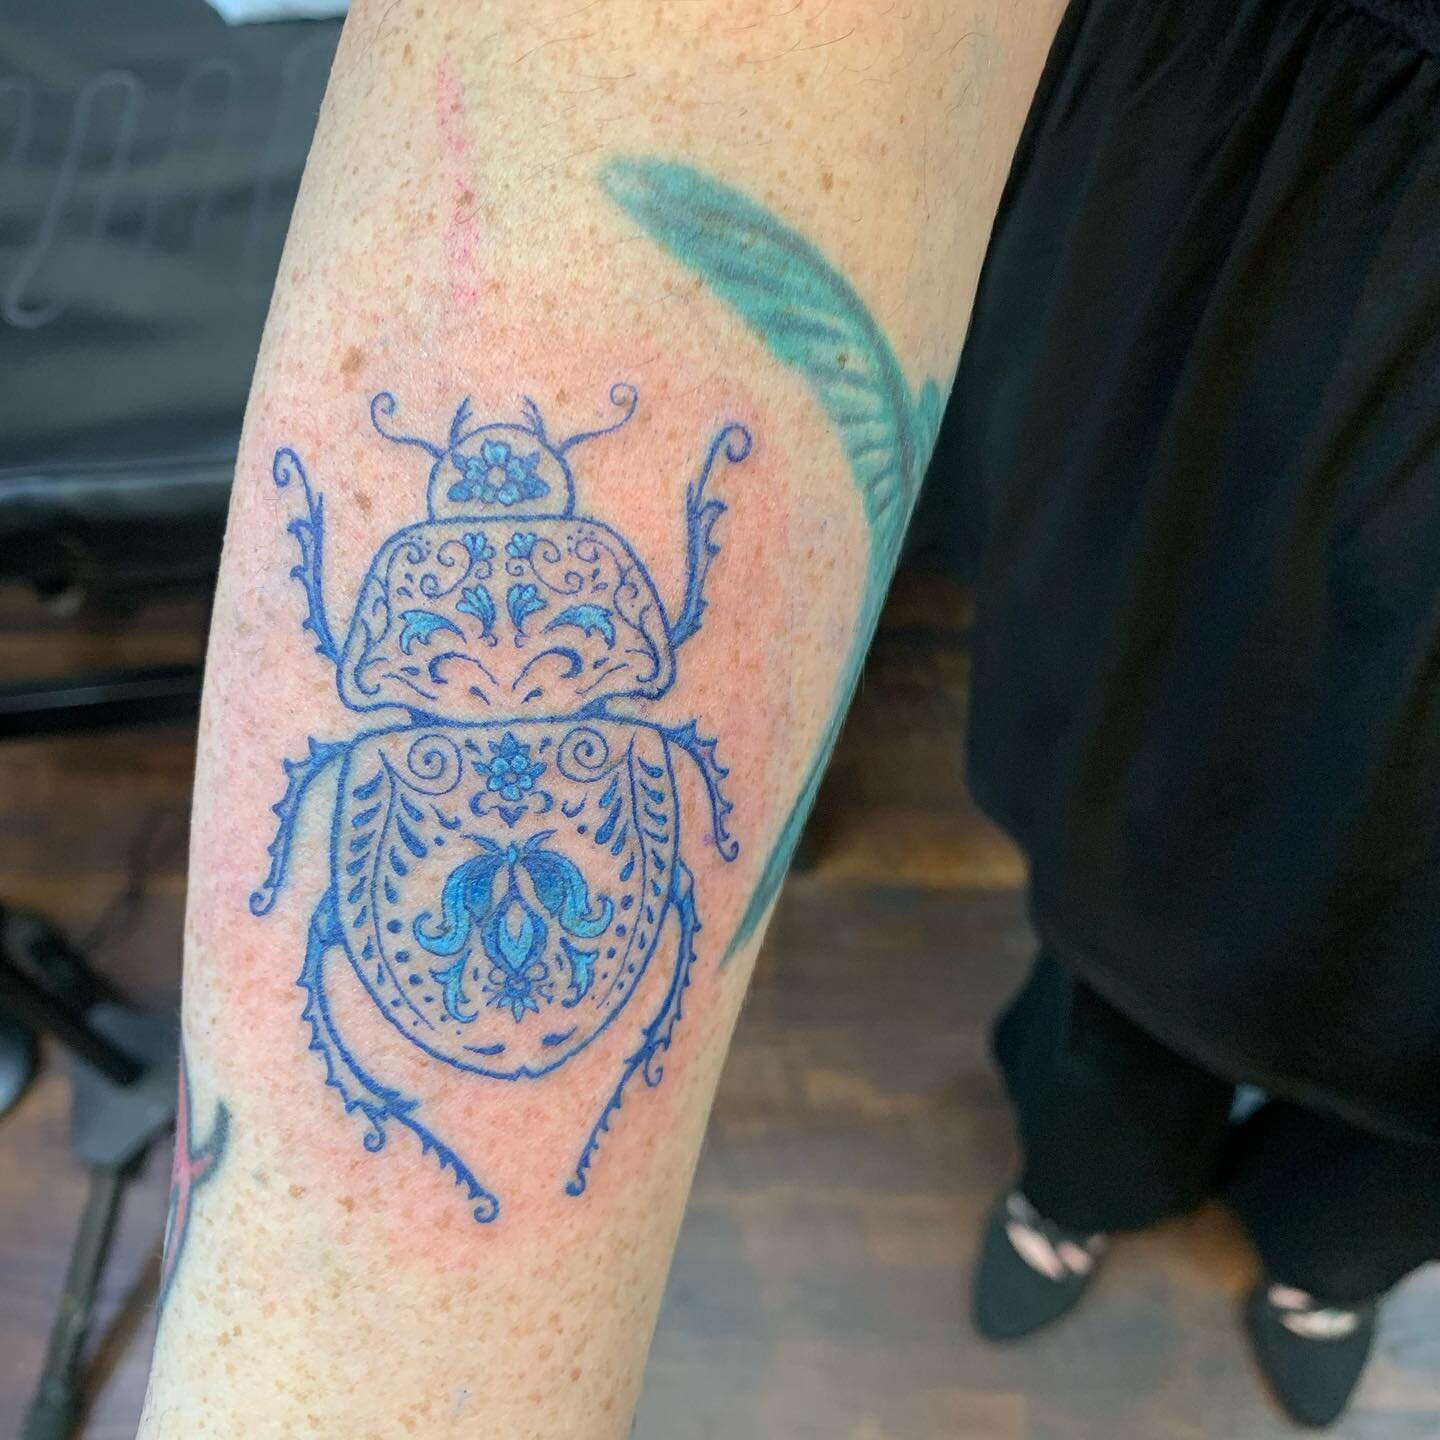 Beautiful bug 🪲by Emily @emilybee_art. To book or inquire please email us at gypsykingstattoos@gmail.com
.
.
.
.
 #tattoos #southeastmichigan #southeastmi #mitattooartist #detroittattooartist #MItattoo #tattooshop #bluetattoo #bugtattoo